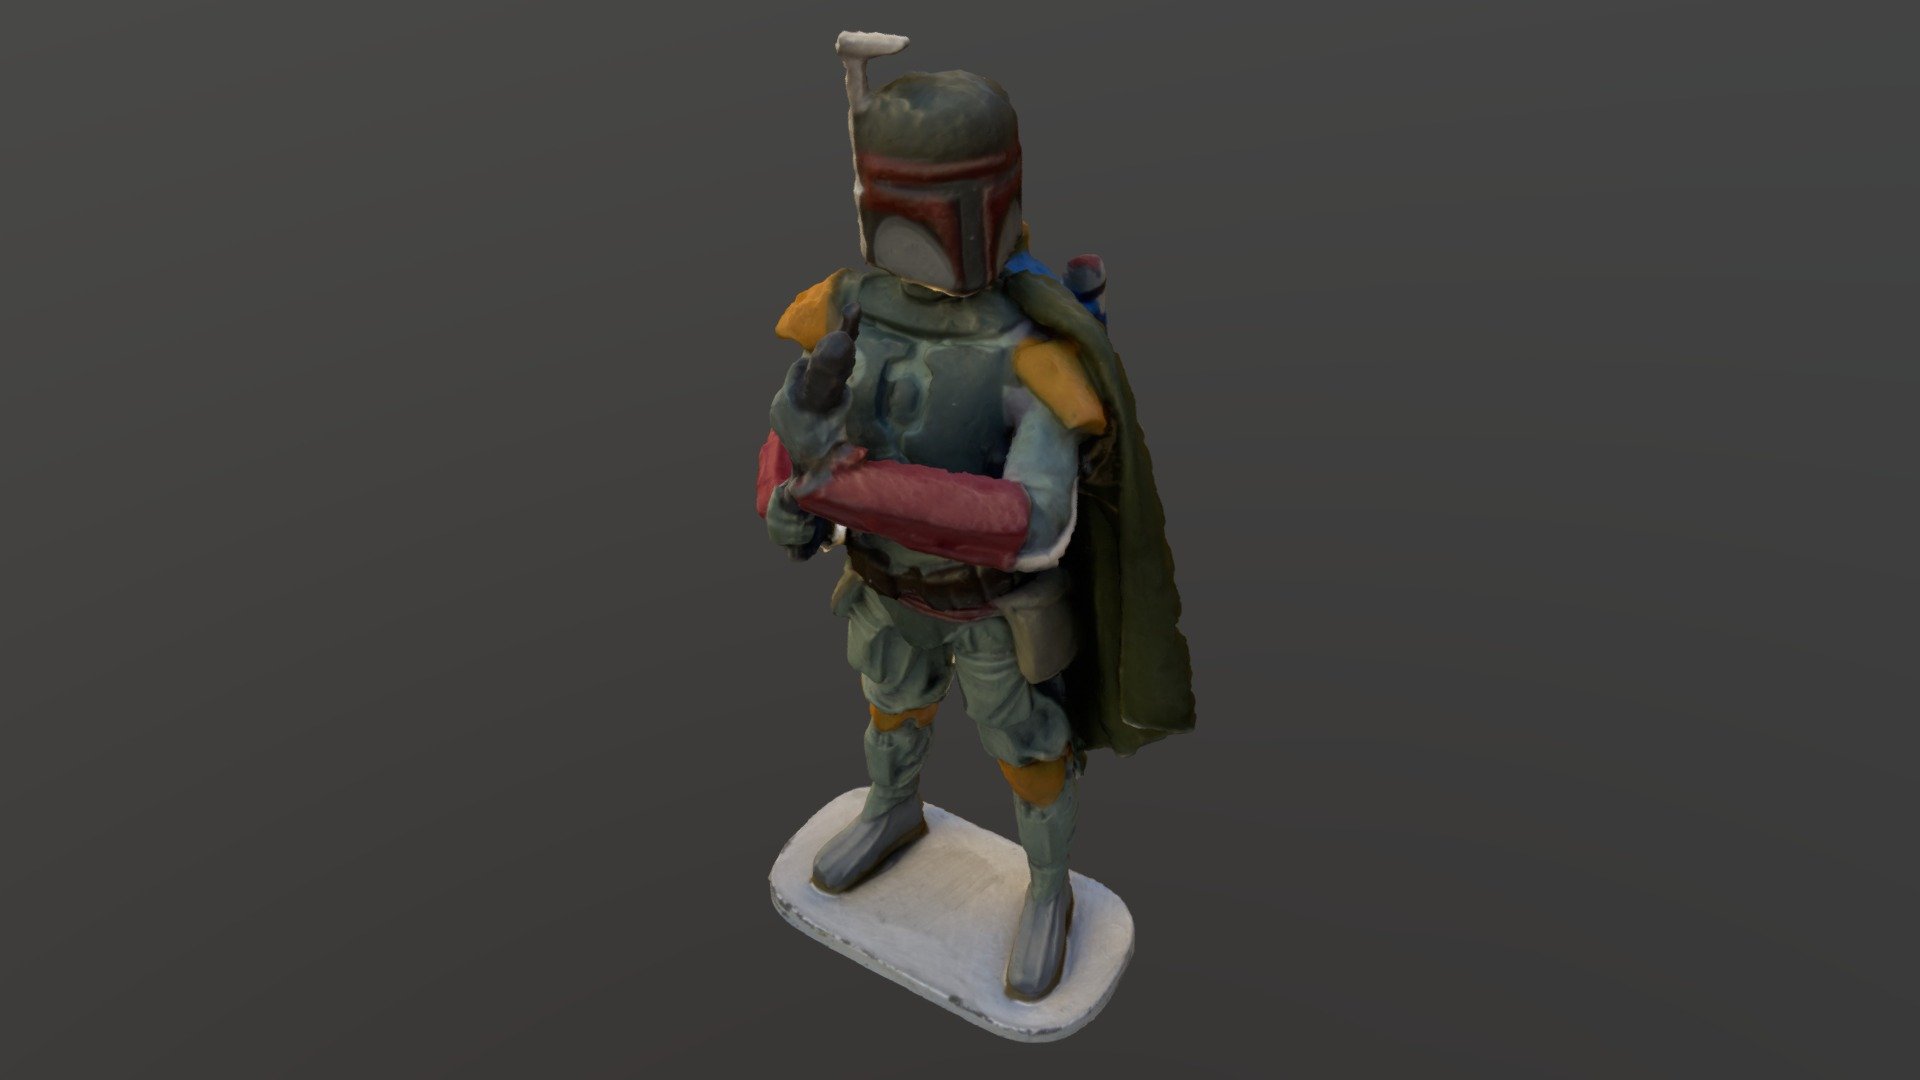 A miniature lead statue of Boba Fett, a character from the Star Wars franchise, captured with RealityScan photogrammetry software 3d model